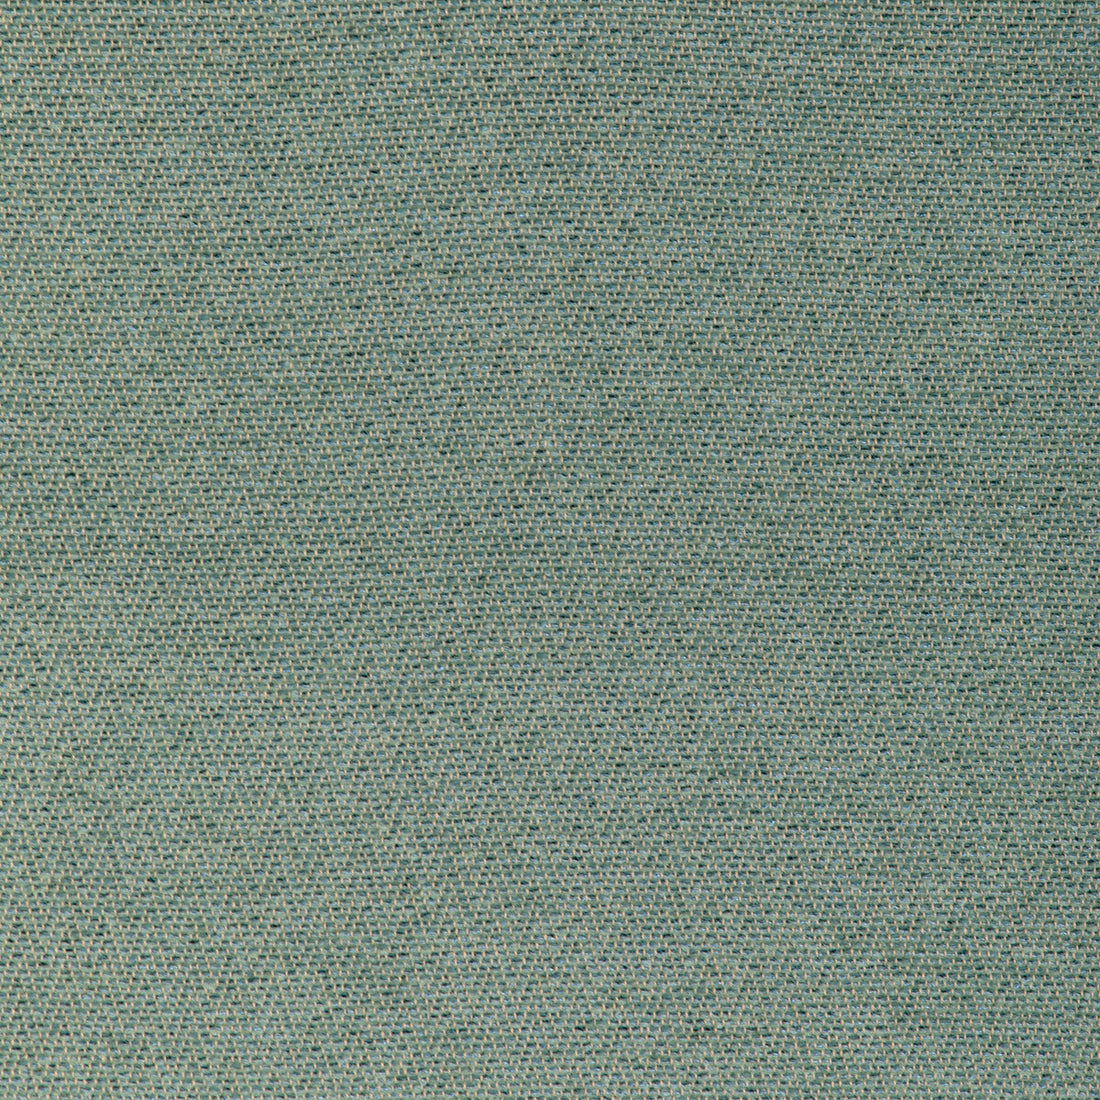 Beauvoir Texture fabric in lake color - pattern 8023153.13.0 - by Brunschwig &amp; Fils in the Chambery Textures IV collection